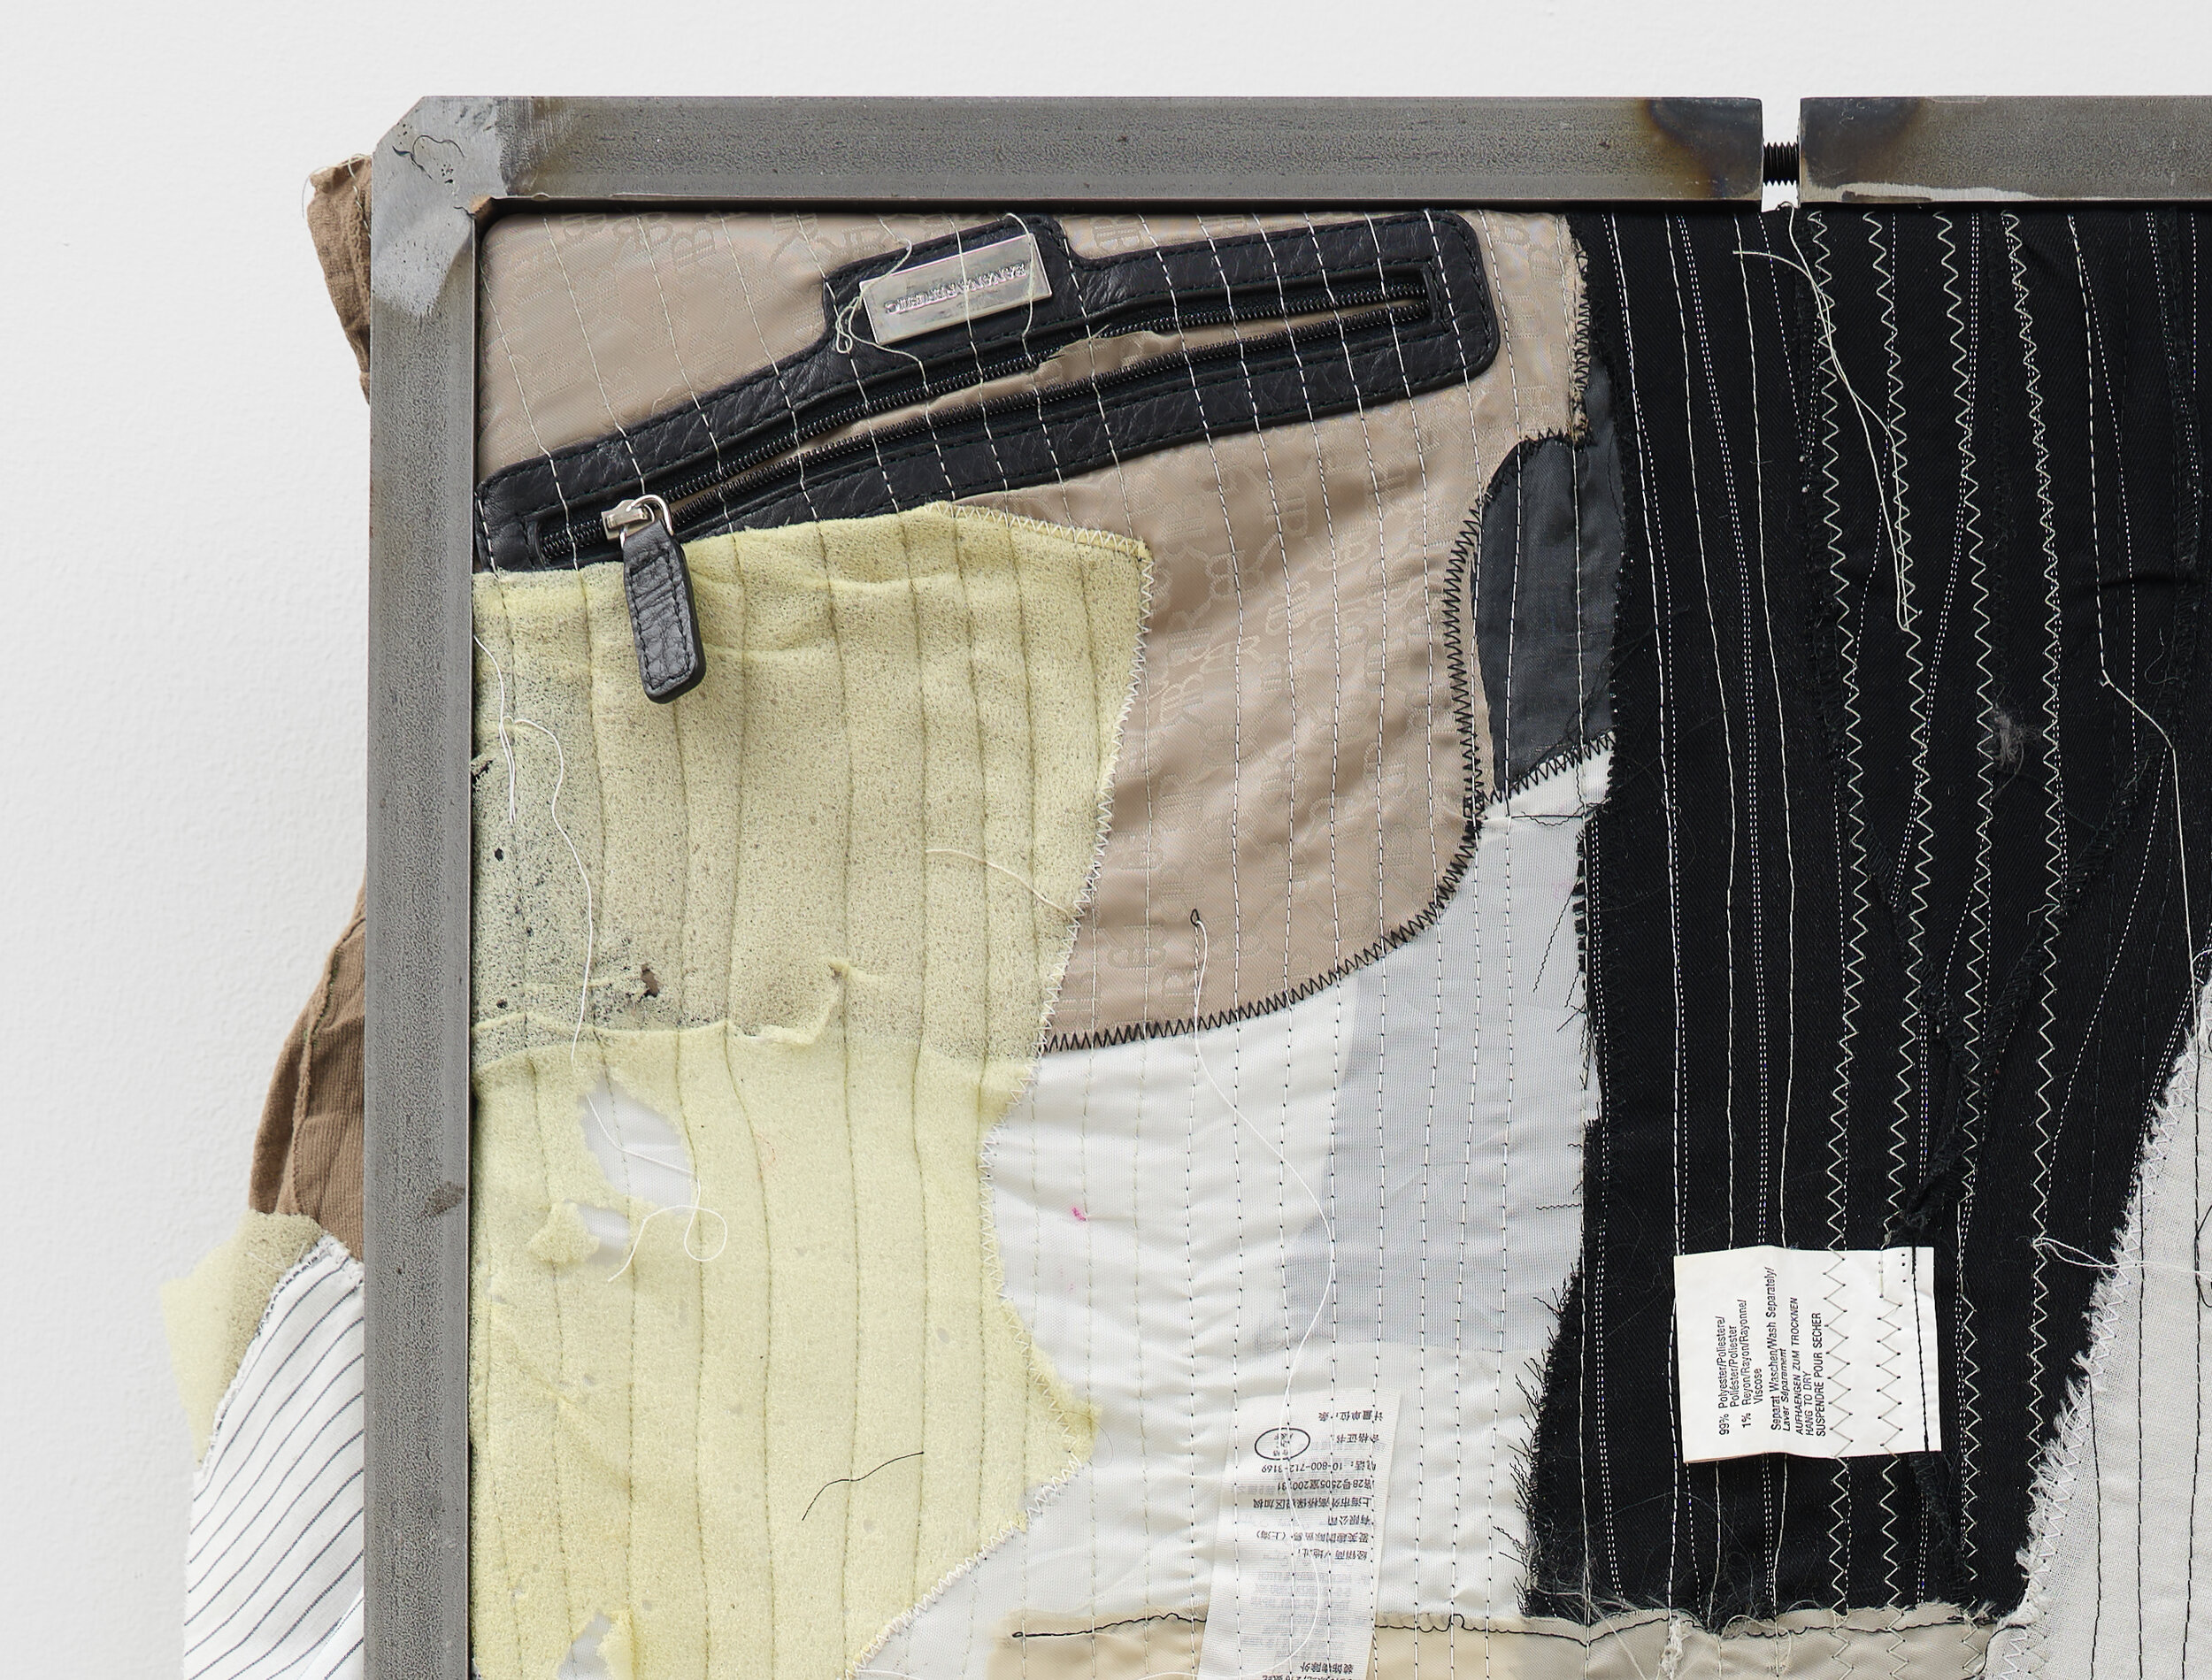  Tenant of Culture  Grip and Stitch , 2020 (detail) Steel, recycled hand bag linings, miscellaneous recycled garment pieces, thread, padding  29 x 21.5 x 5 in (74 x 54 x 12 cm) 